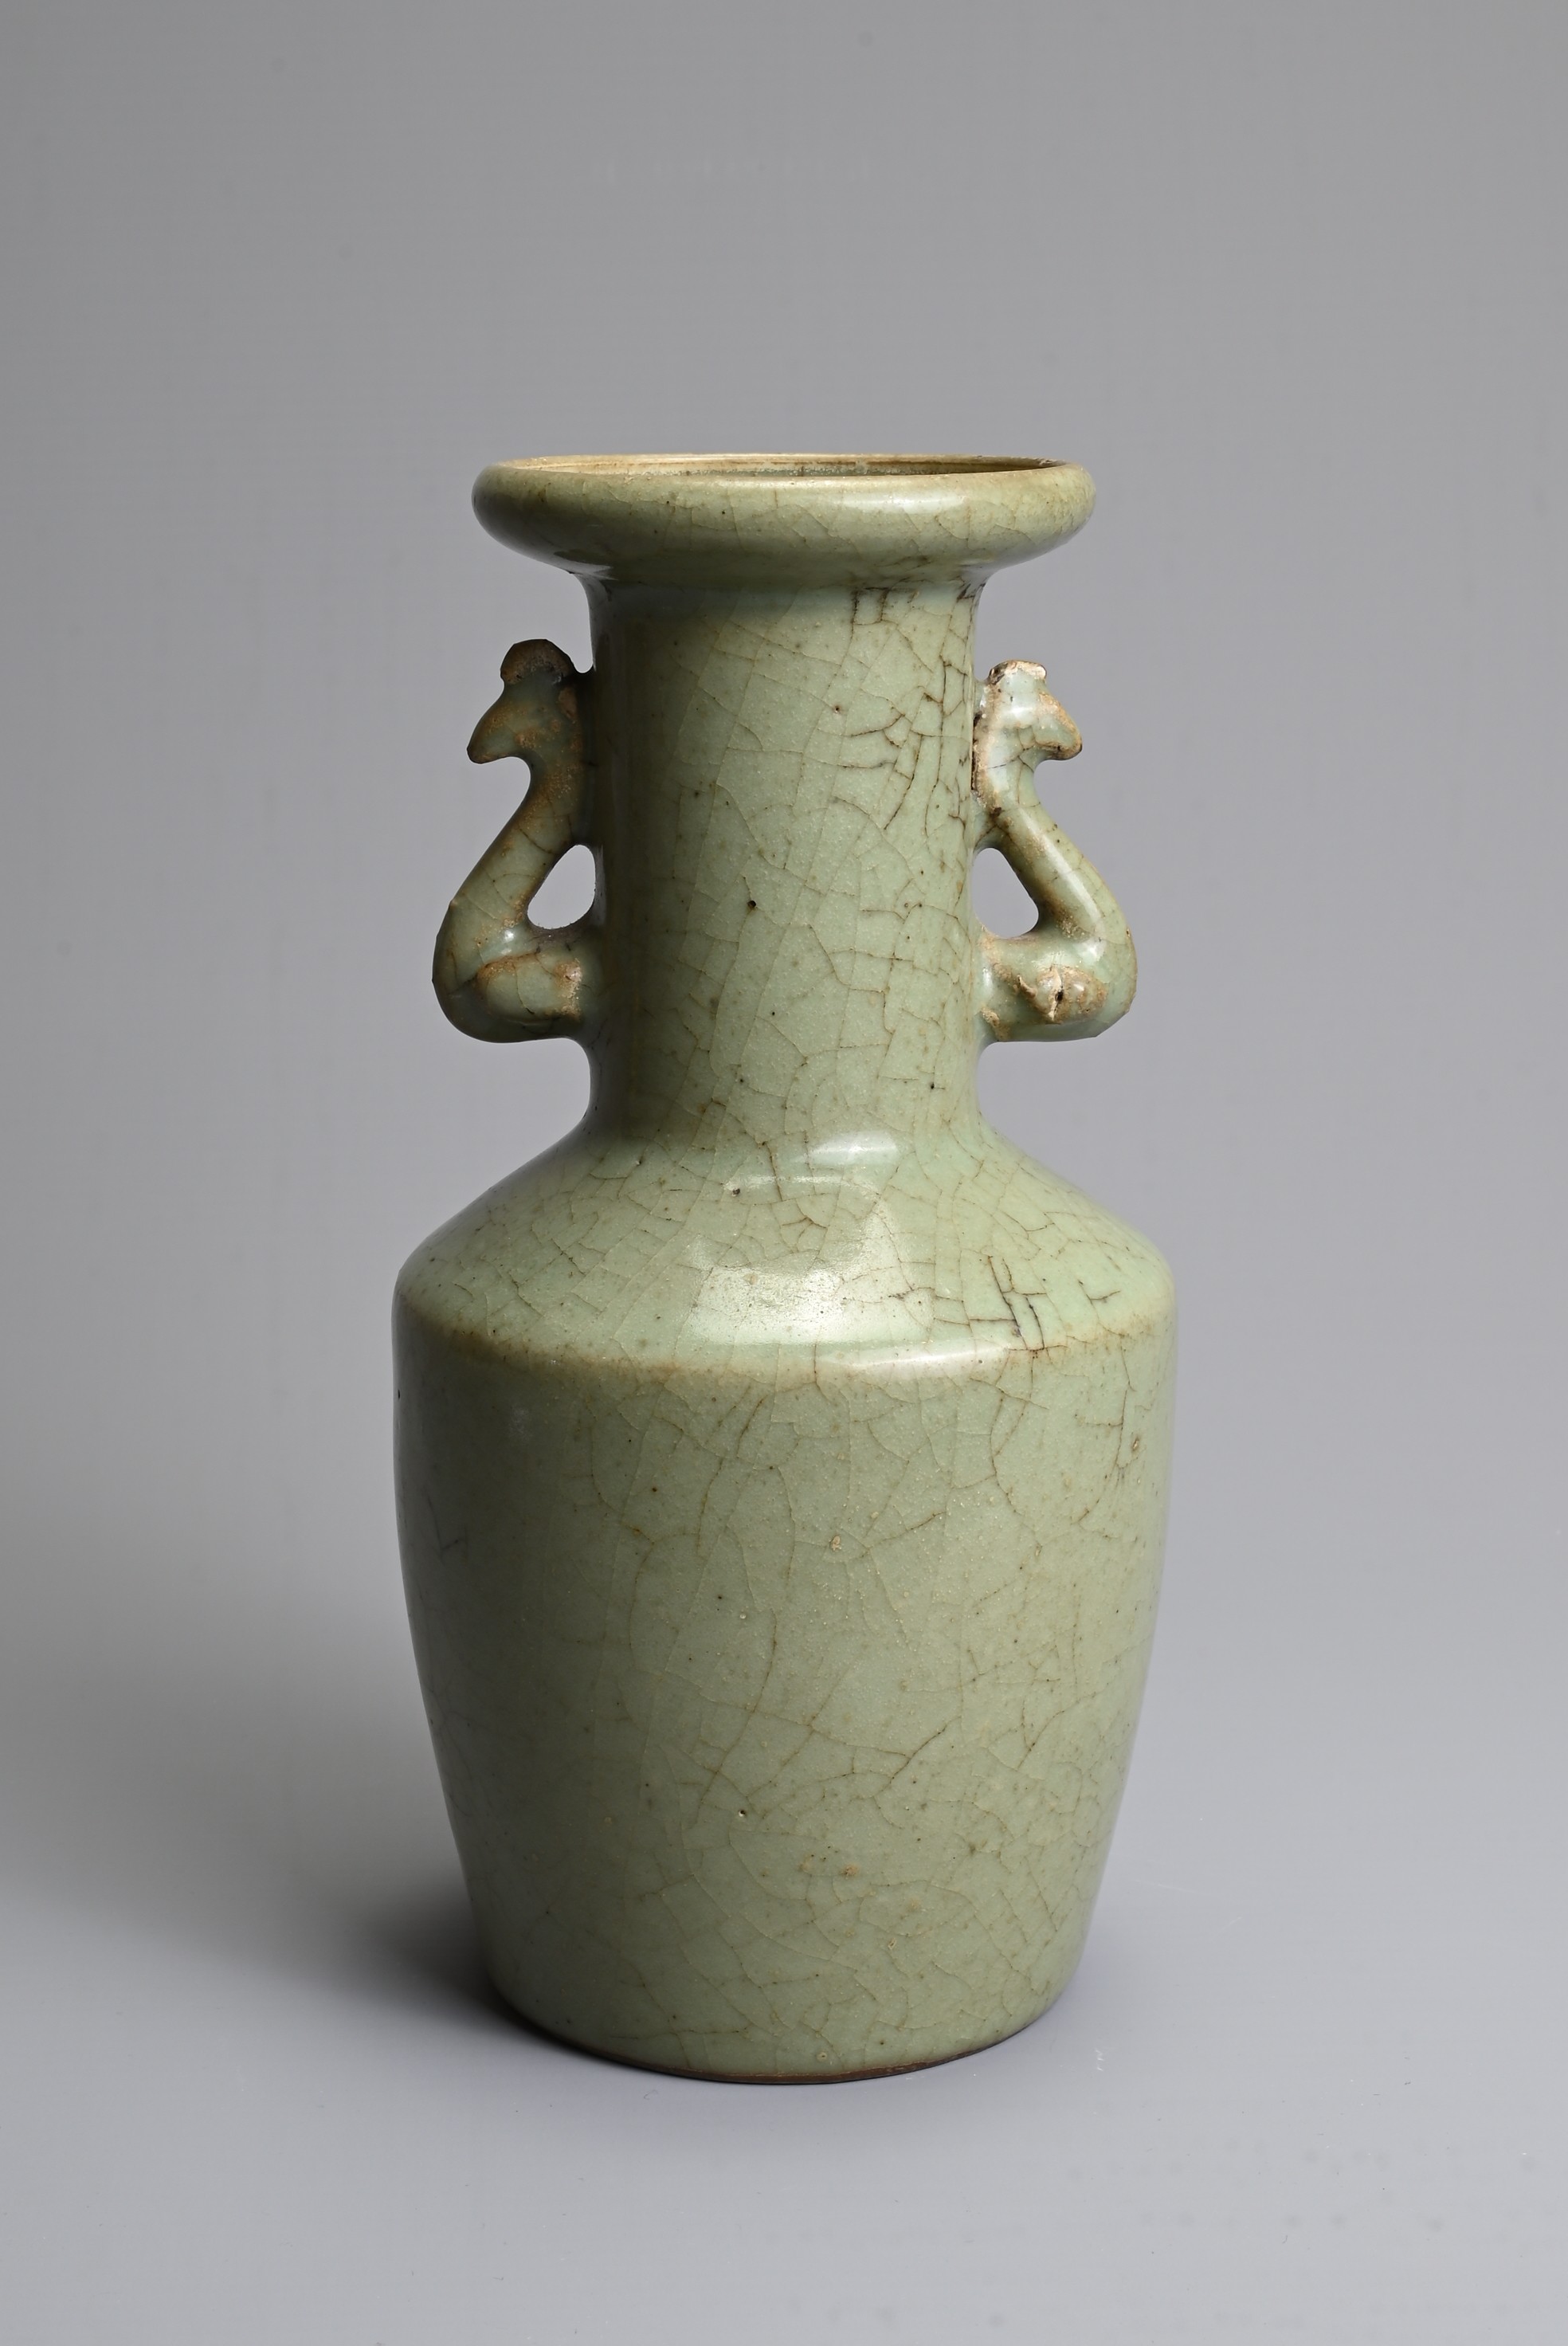 A CHINESE LONGQUAN CELADON GLAZED MALLET VASE, SONG/YUAN DYNASTY. Mallet shaped vase with flared rim